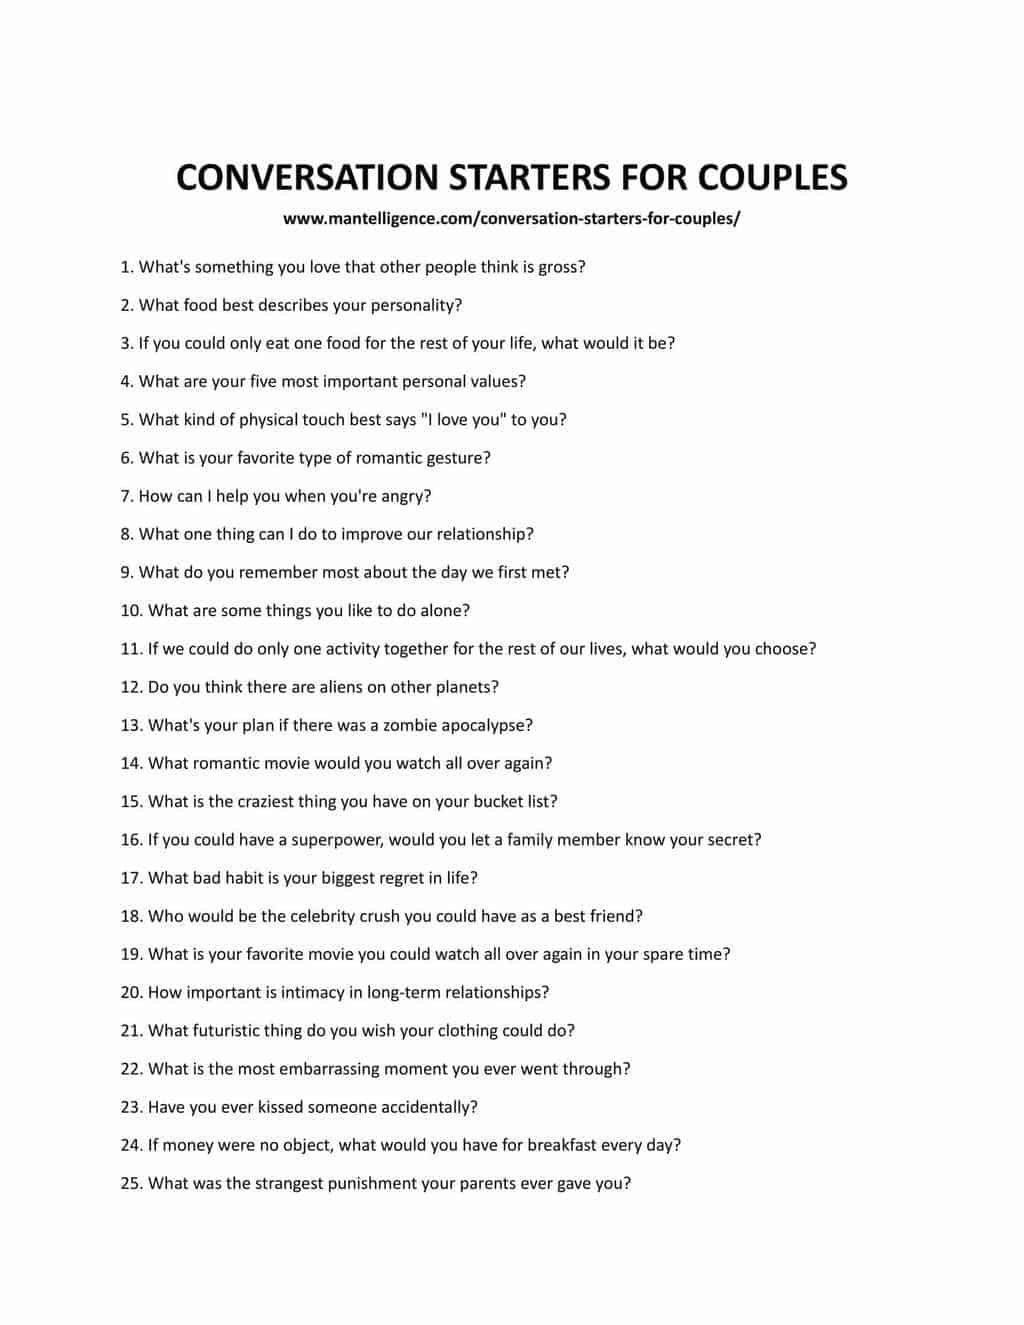 Downloadable and printable list of questions.